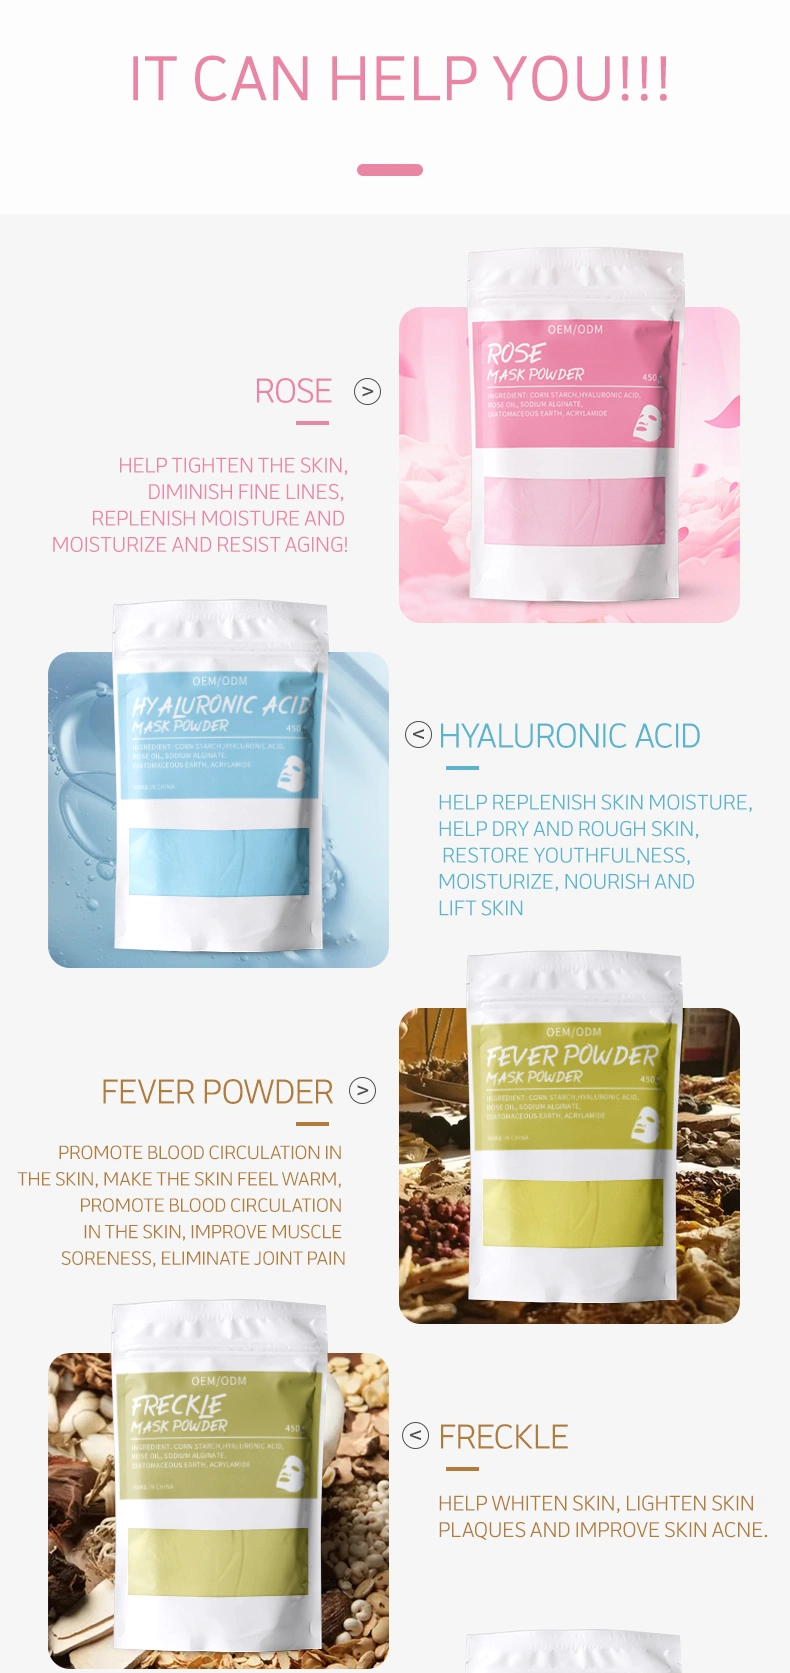 Aixin Cosmetics Mask Powder Skin Care Soft DIY Peel off Facial Clay Jelly Face Mask Chamomile Face Mask Powder